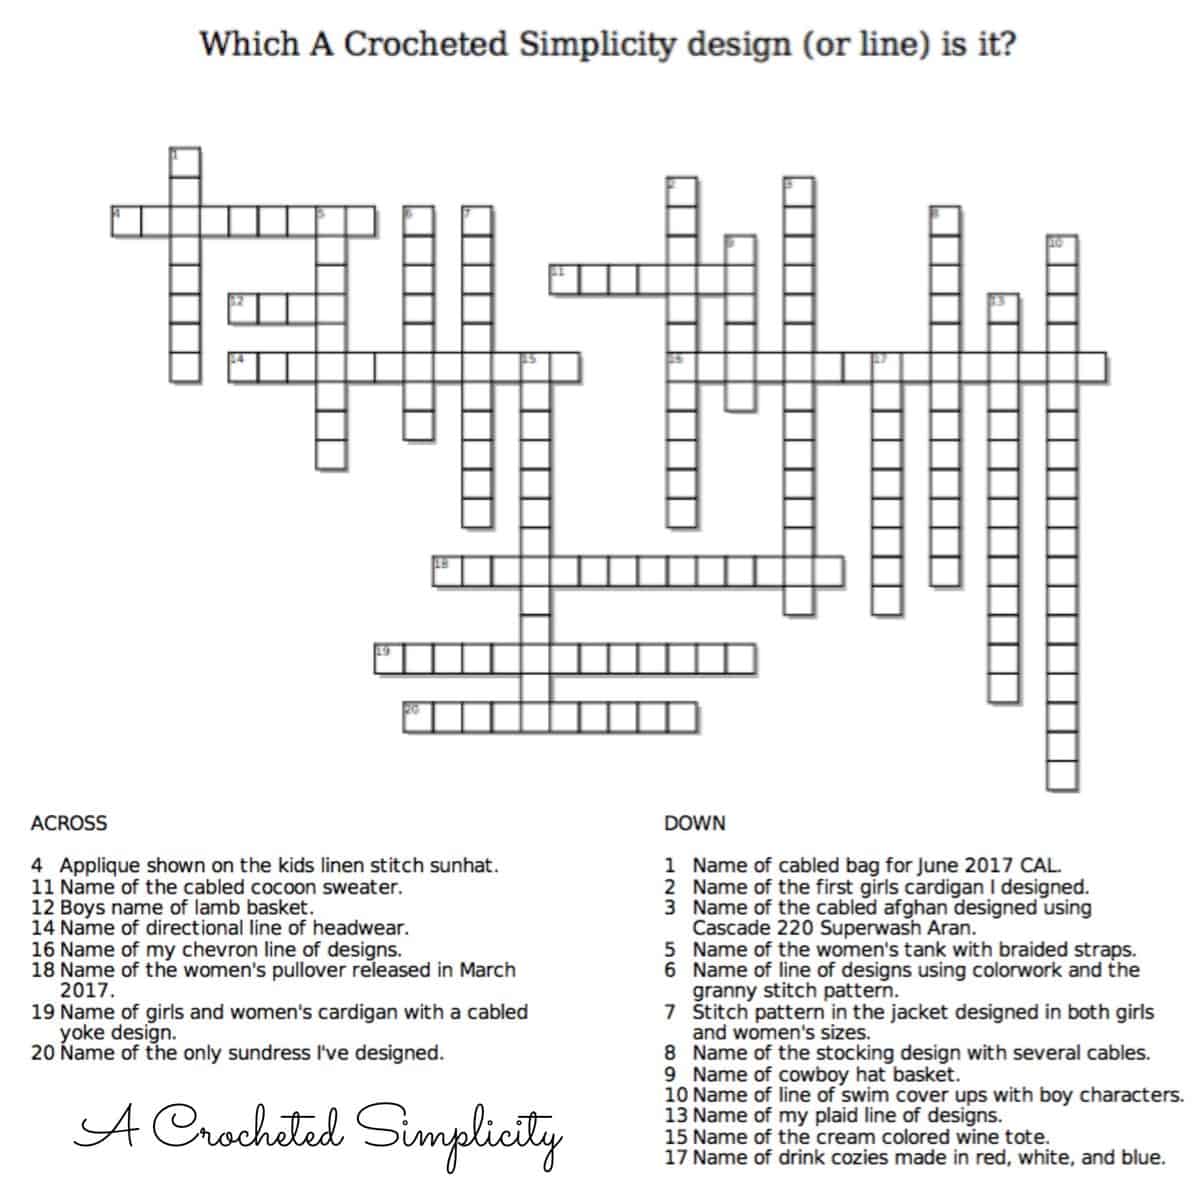 Crochet Crossword Puzzle Test Your Knowledge A Crocheted Simplicity